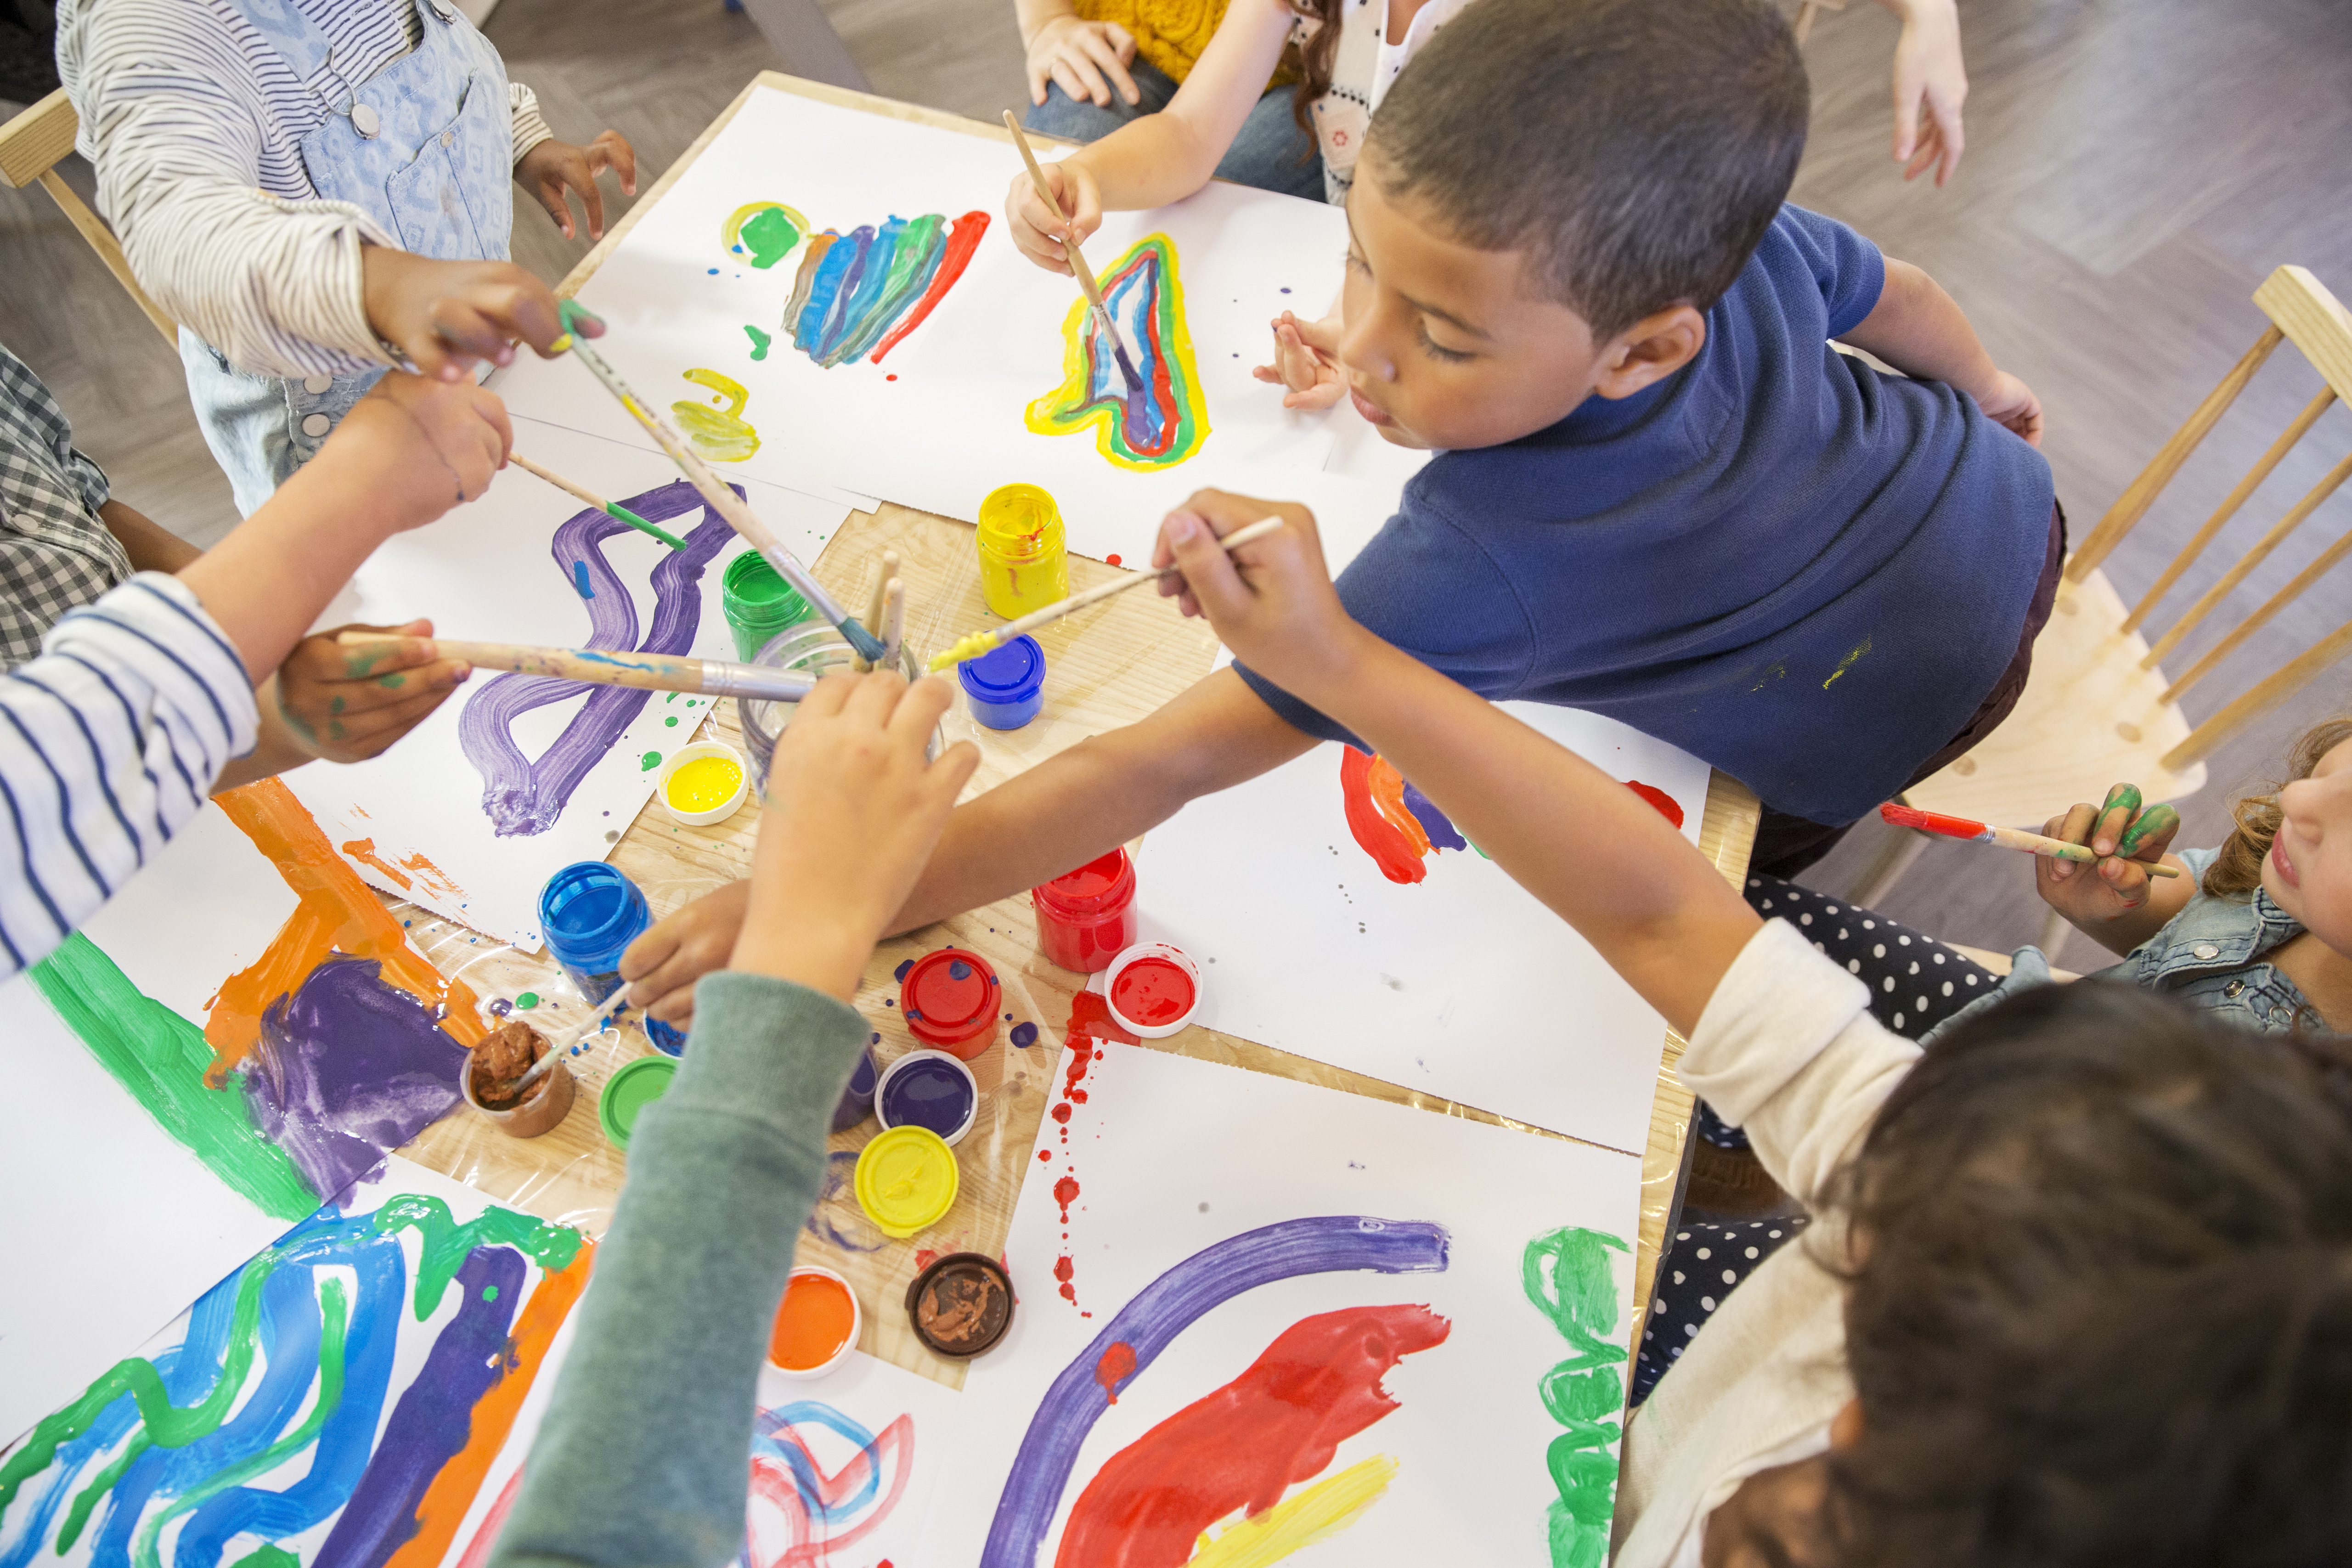 Children painting in class